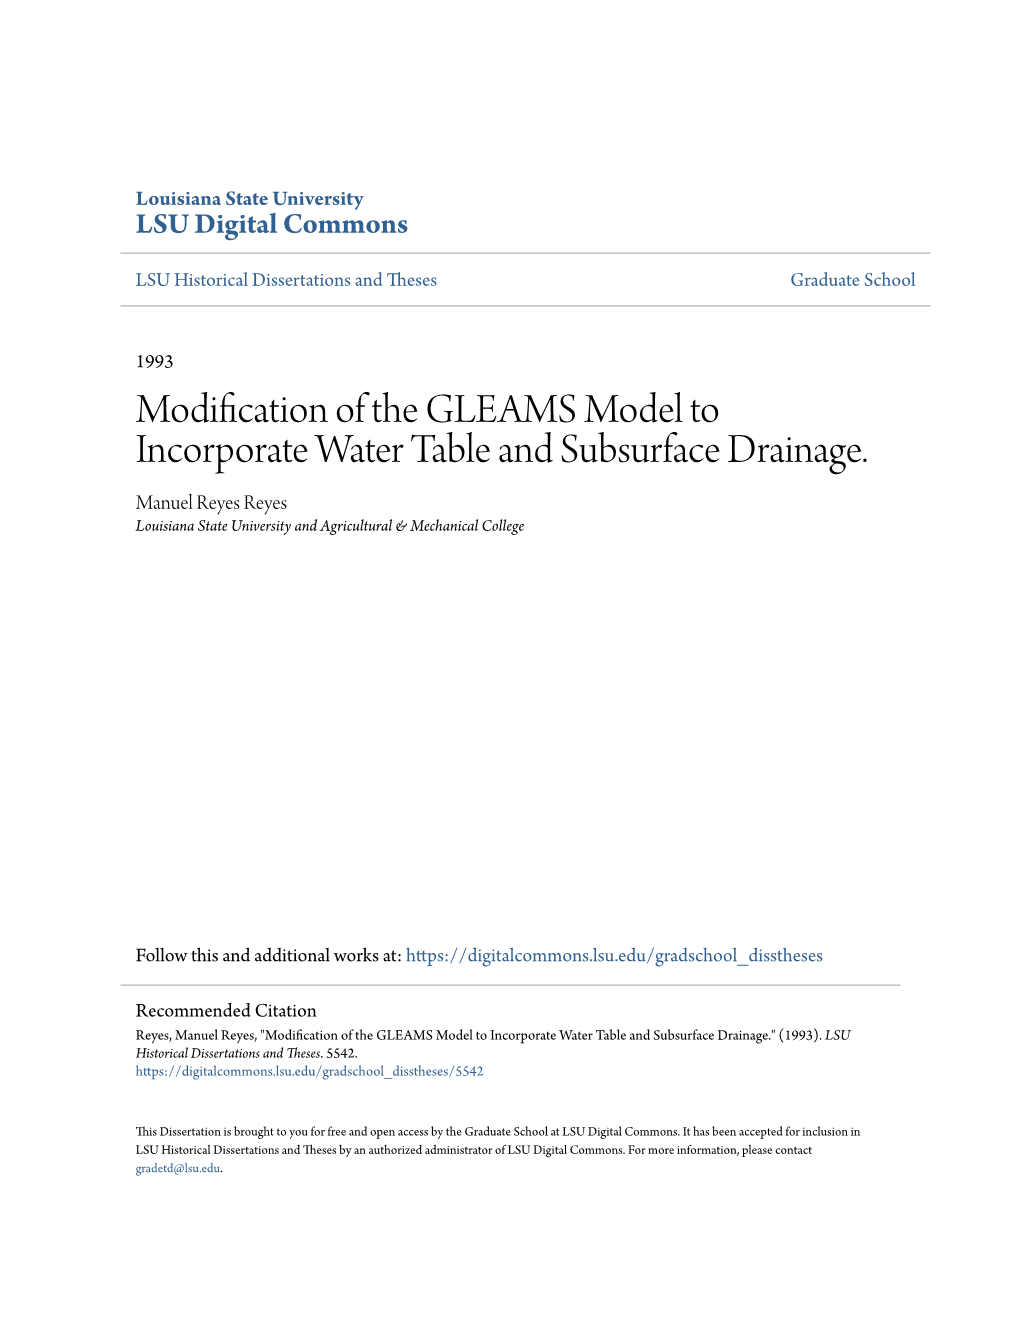 Modification of the GLEAMS Model to Incorporate Water Table and Subsurface Drainage